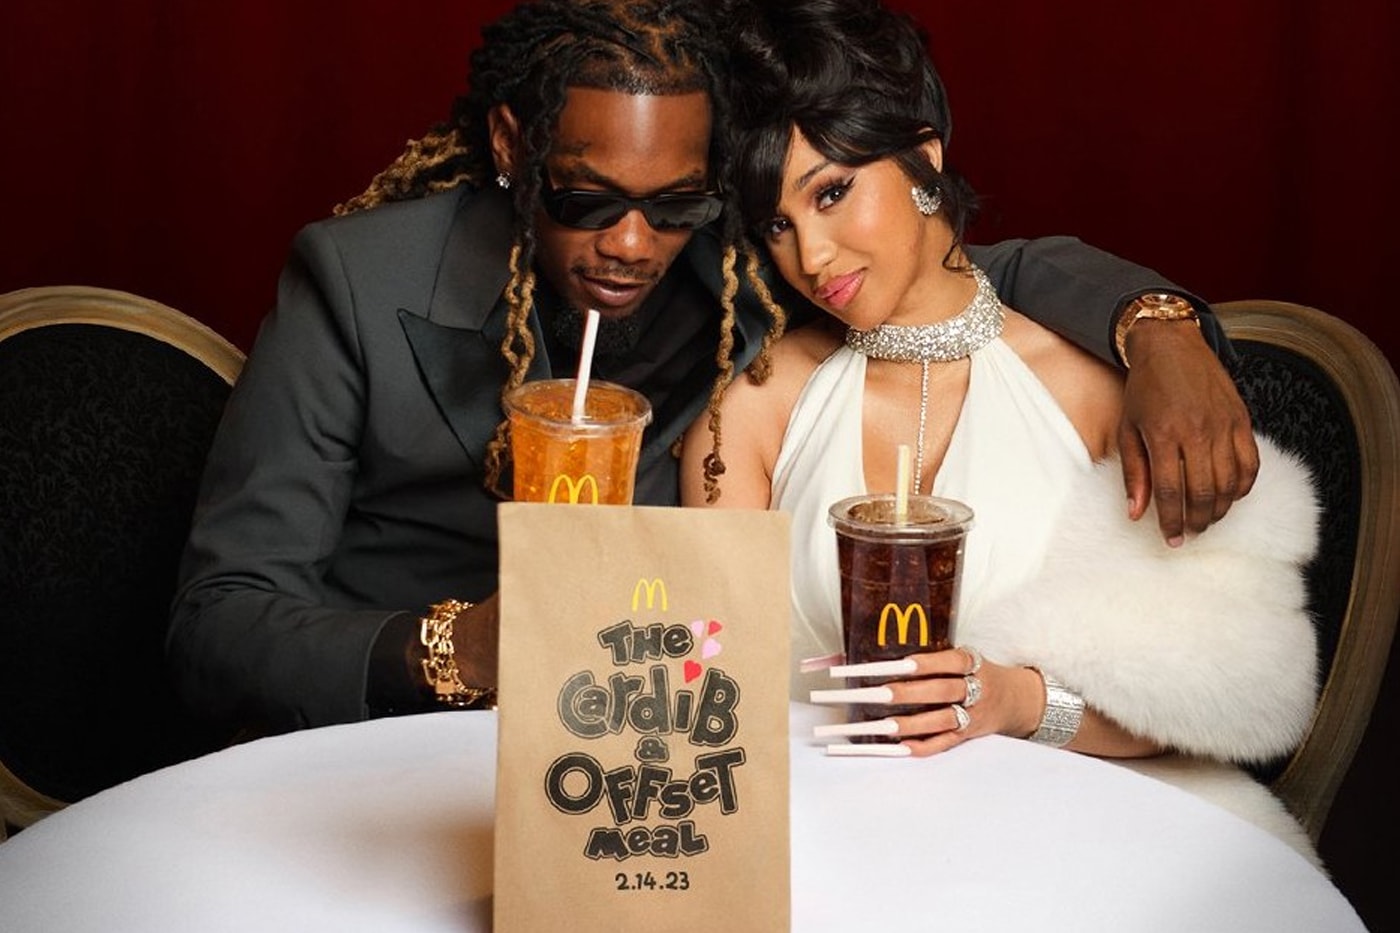 McDonalds Cardi B Offset meal february 14 valentines tuesday cheeseburger bbq sauce large coke 